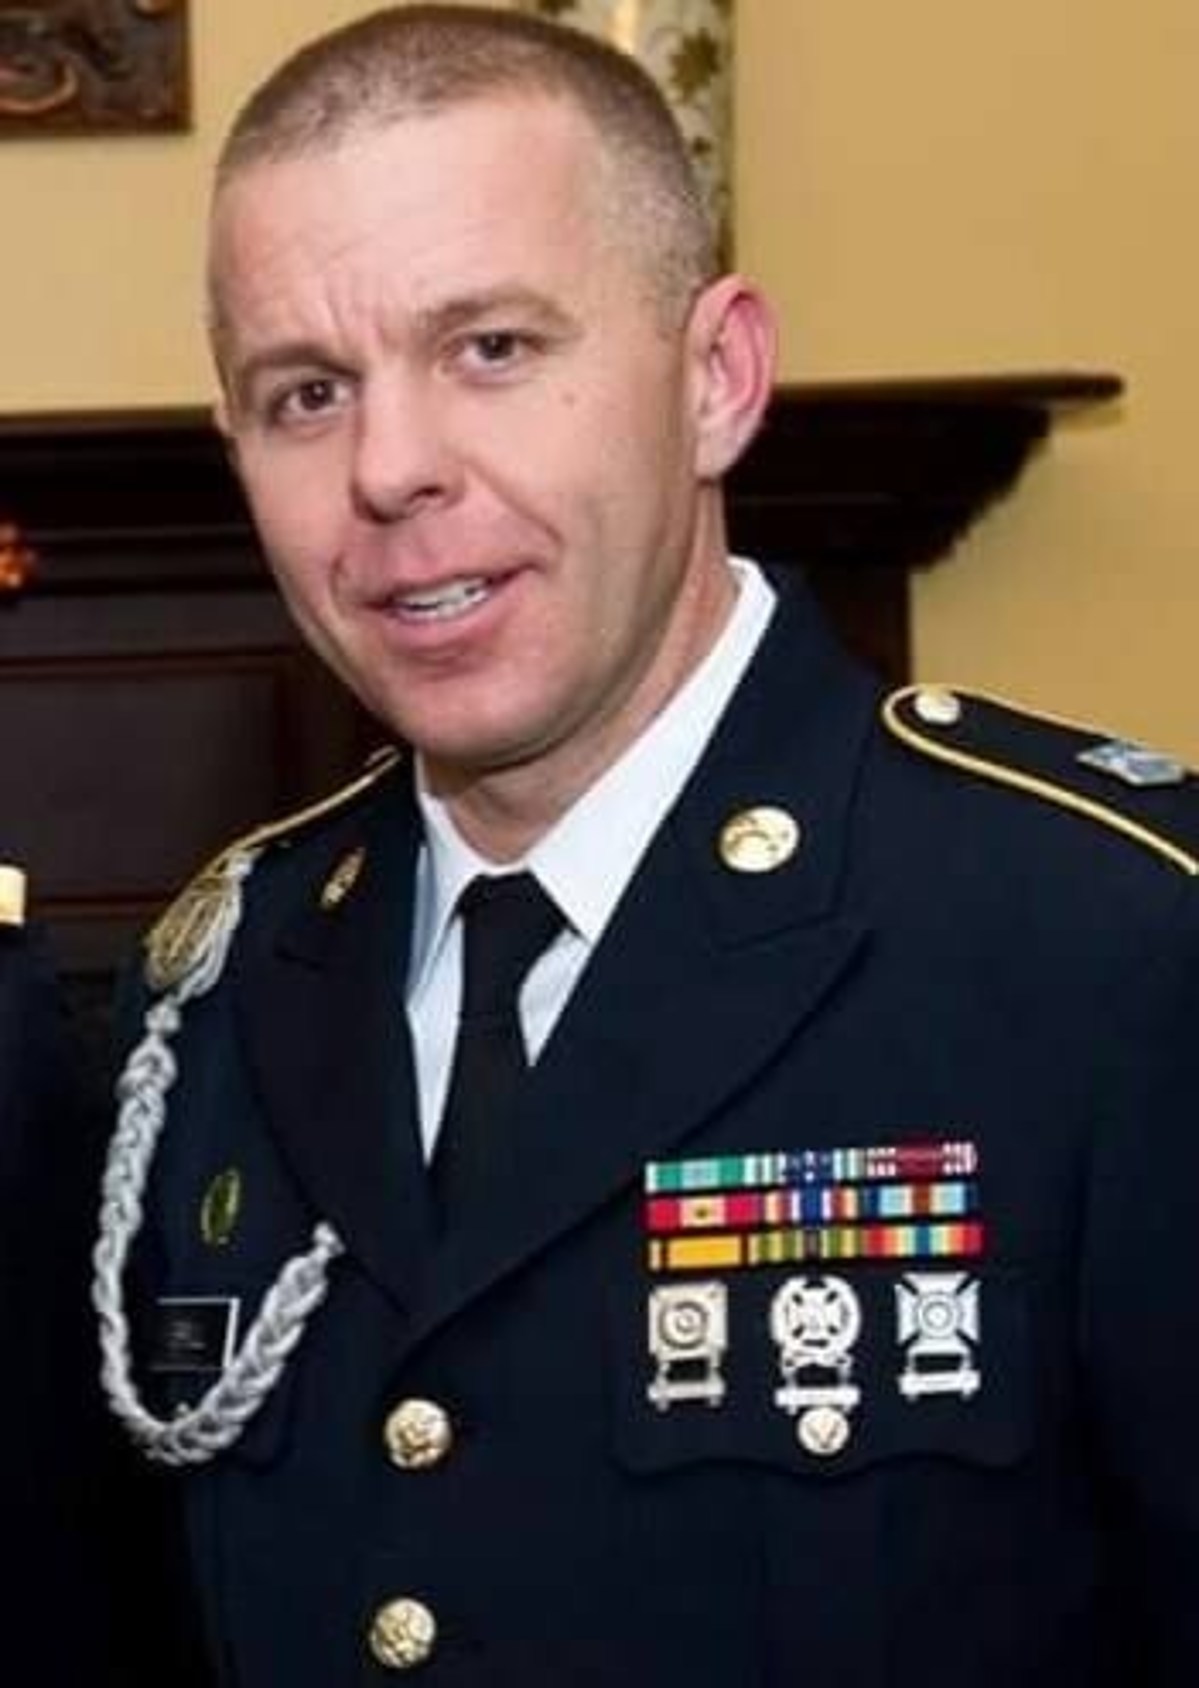 Barry Brill A Us Army Master Sergeant Dies At 44